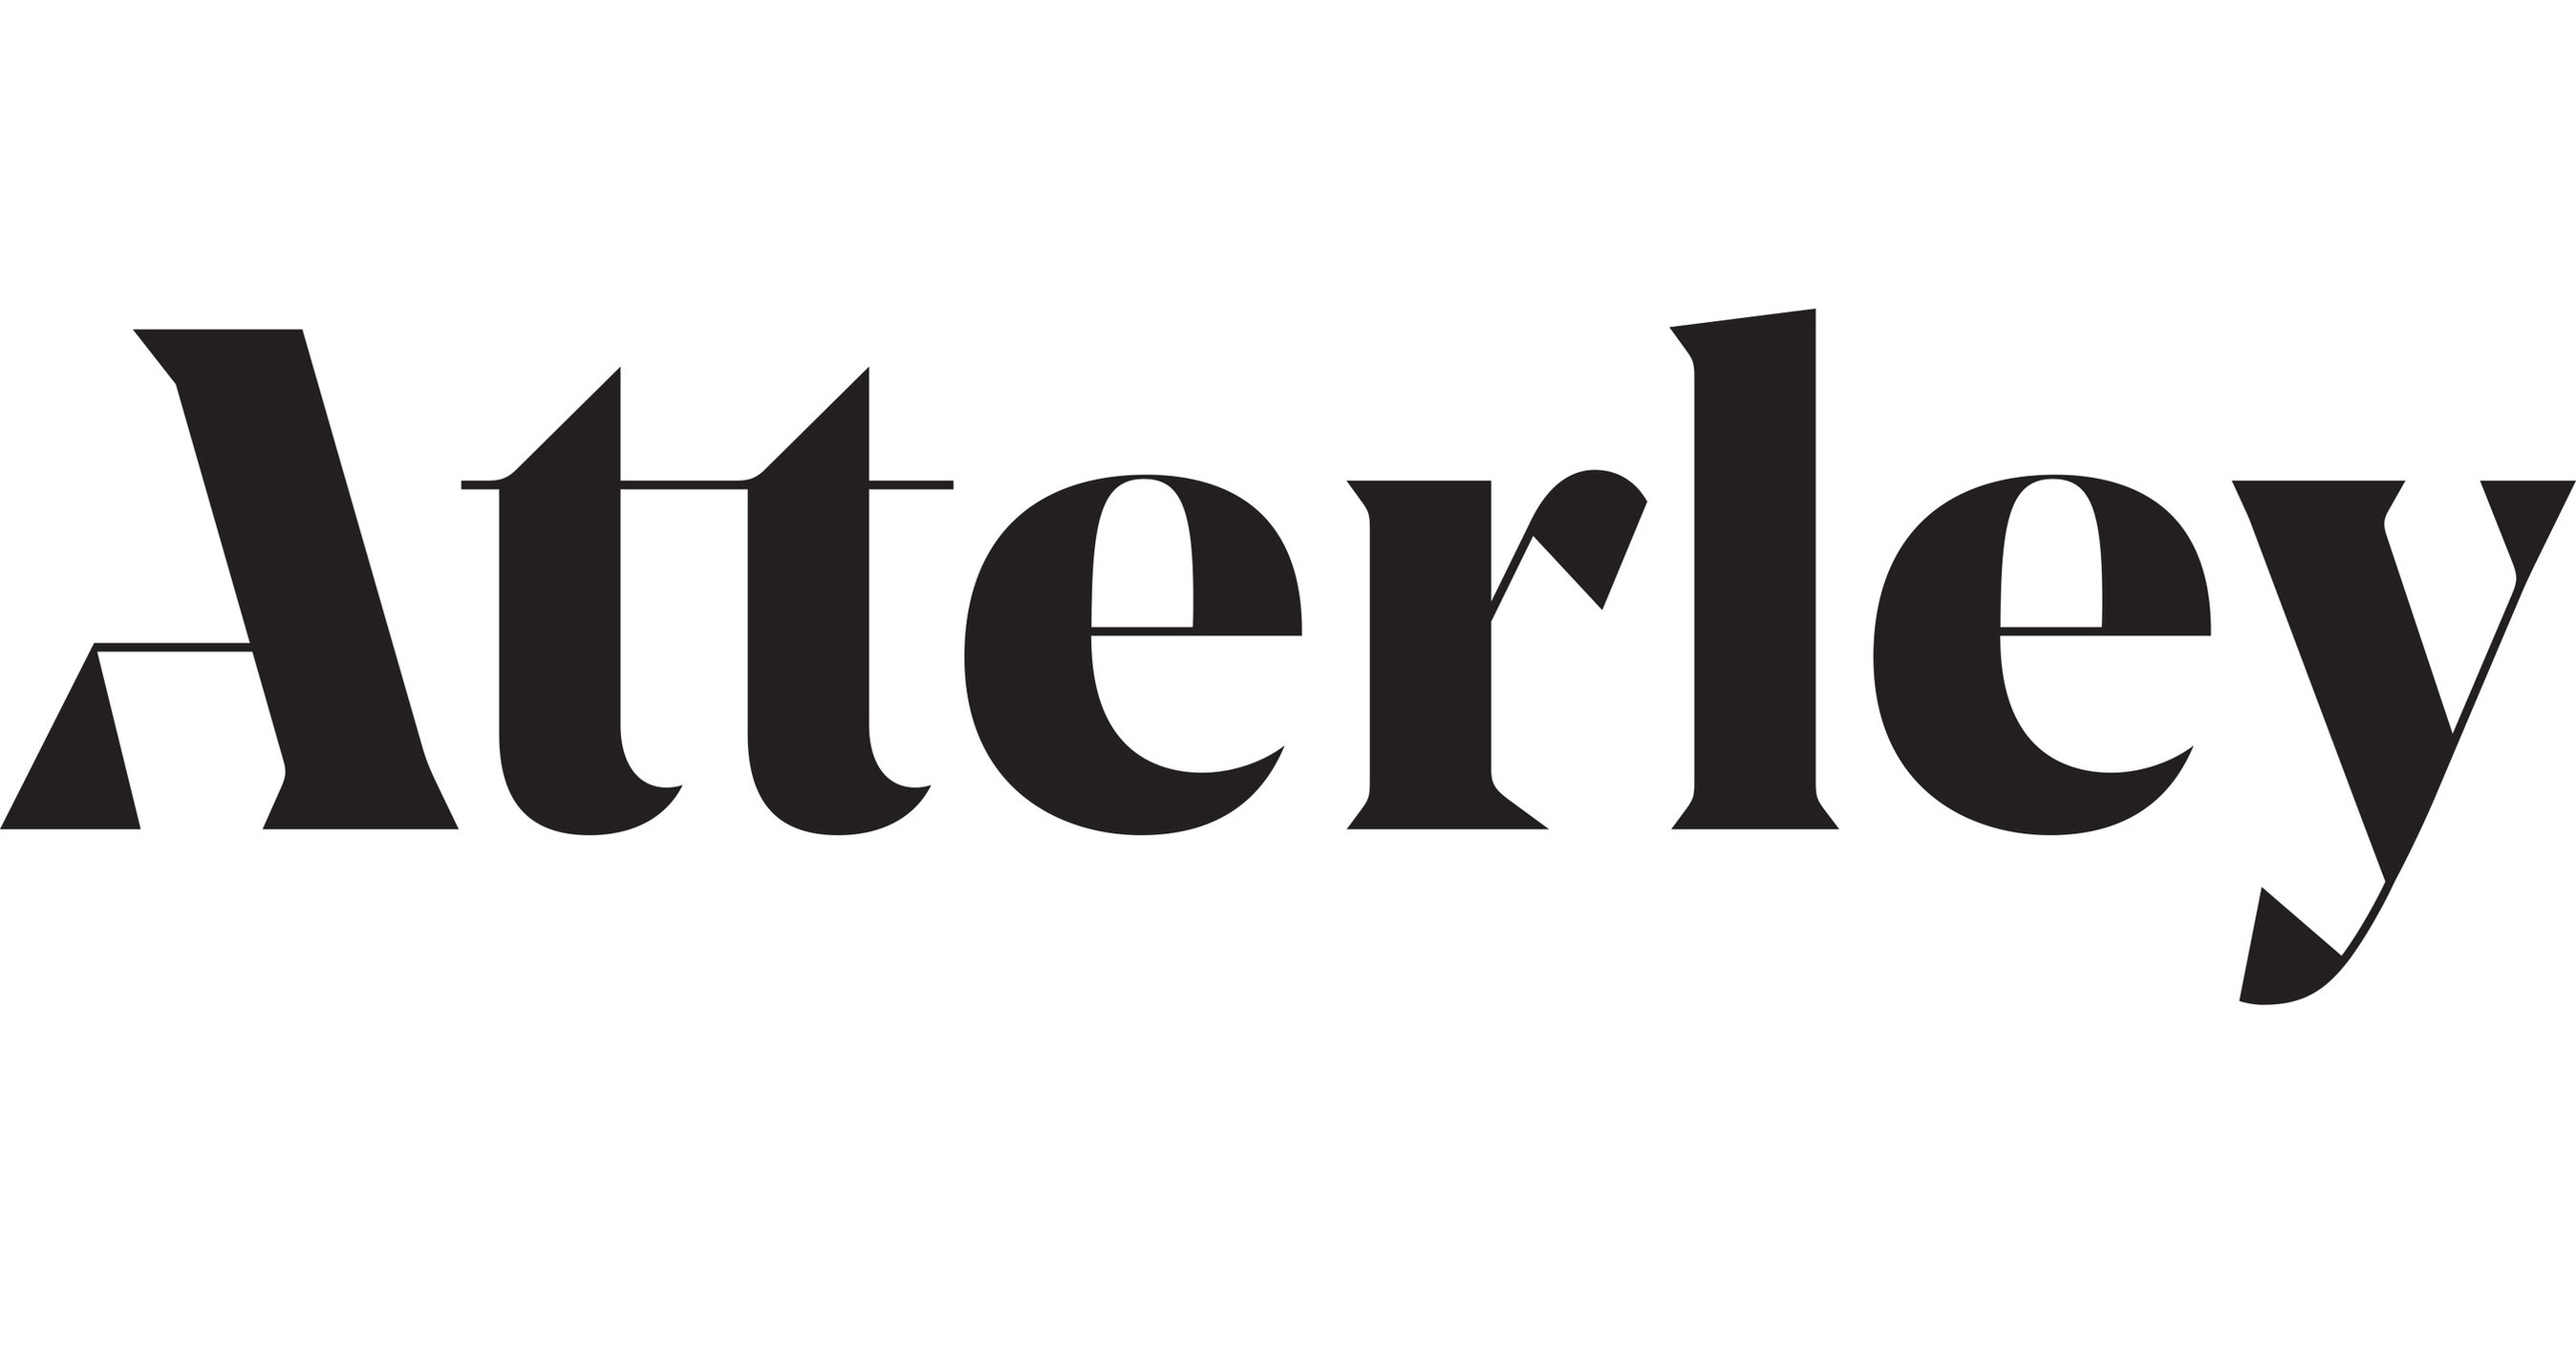 Maven Capital Partners leads £3m funding round for fashion website Atterley.com